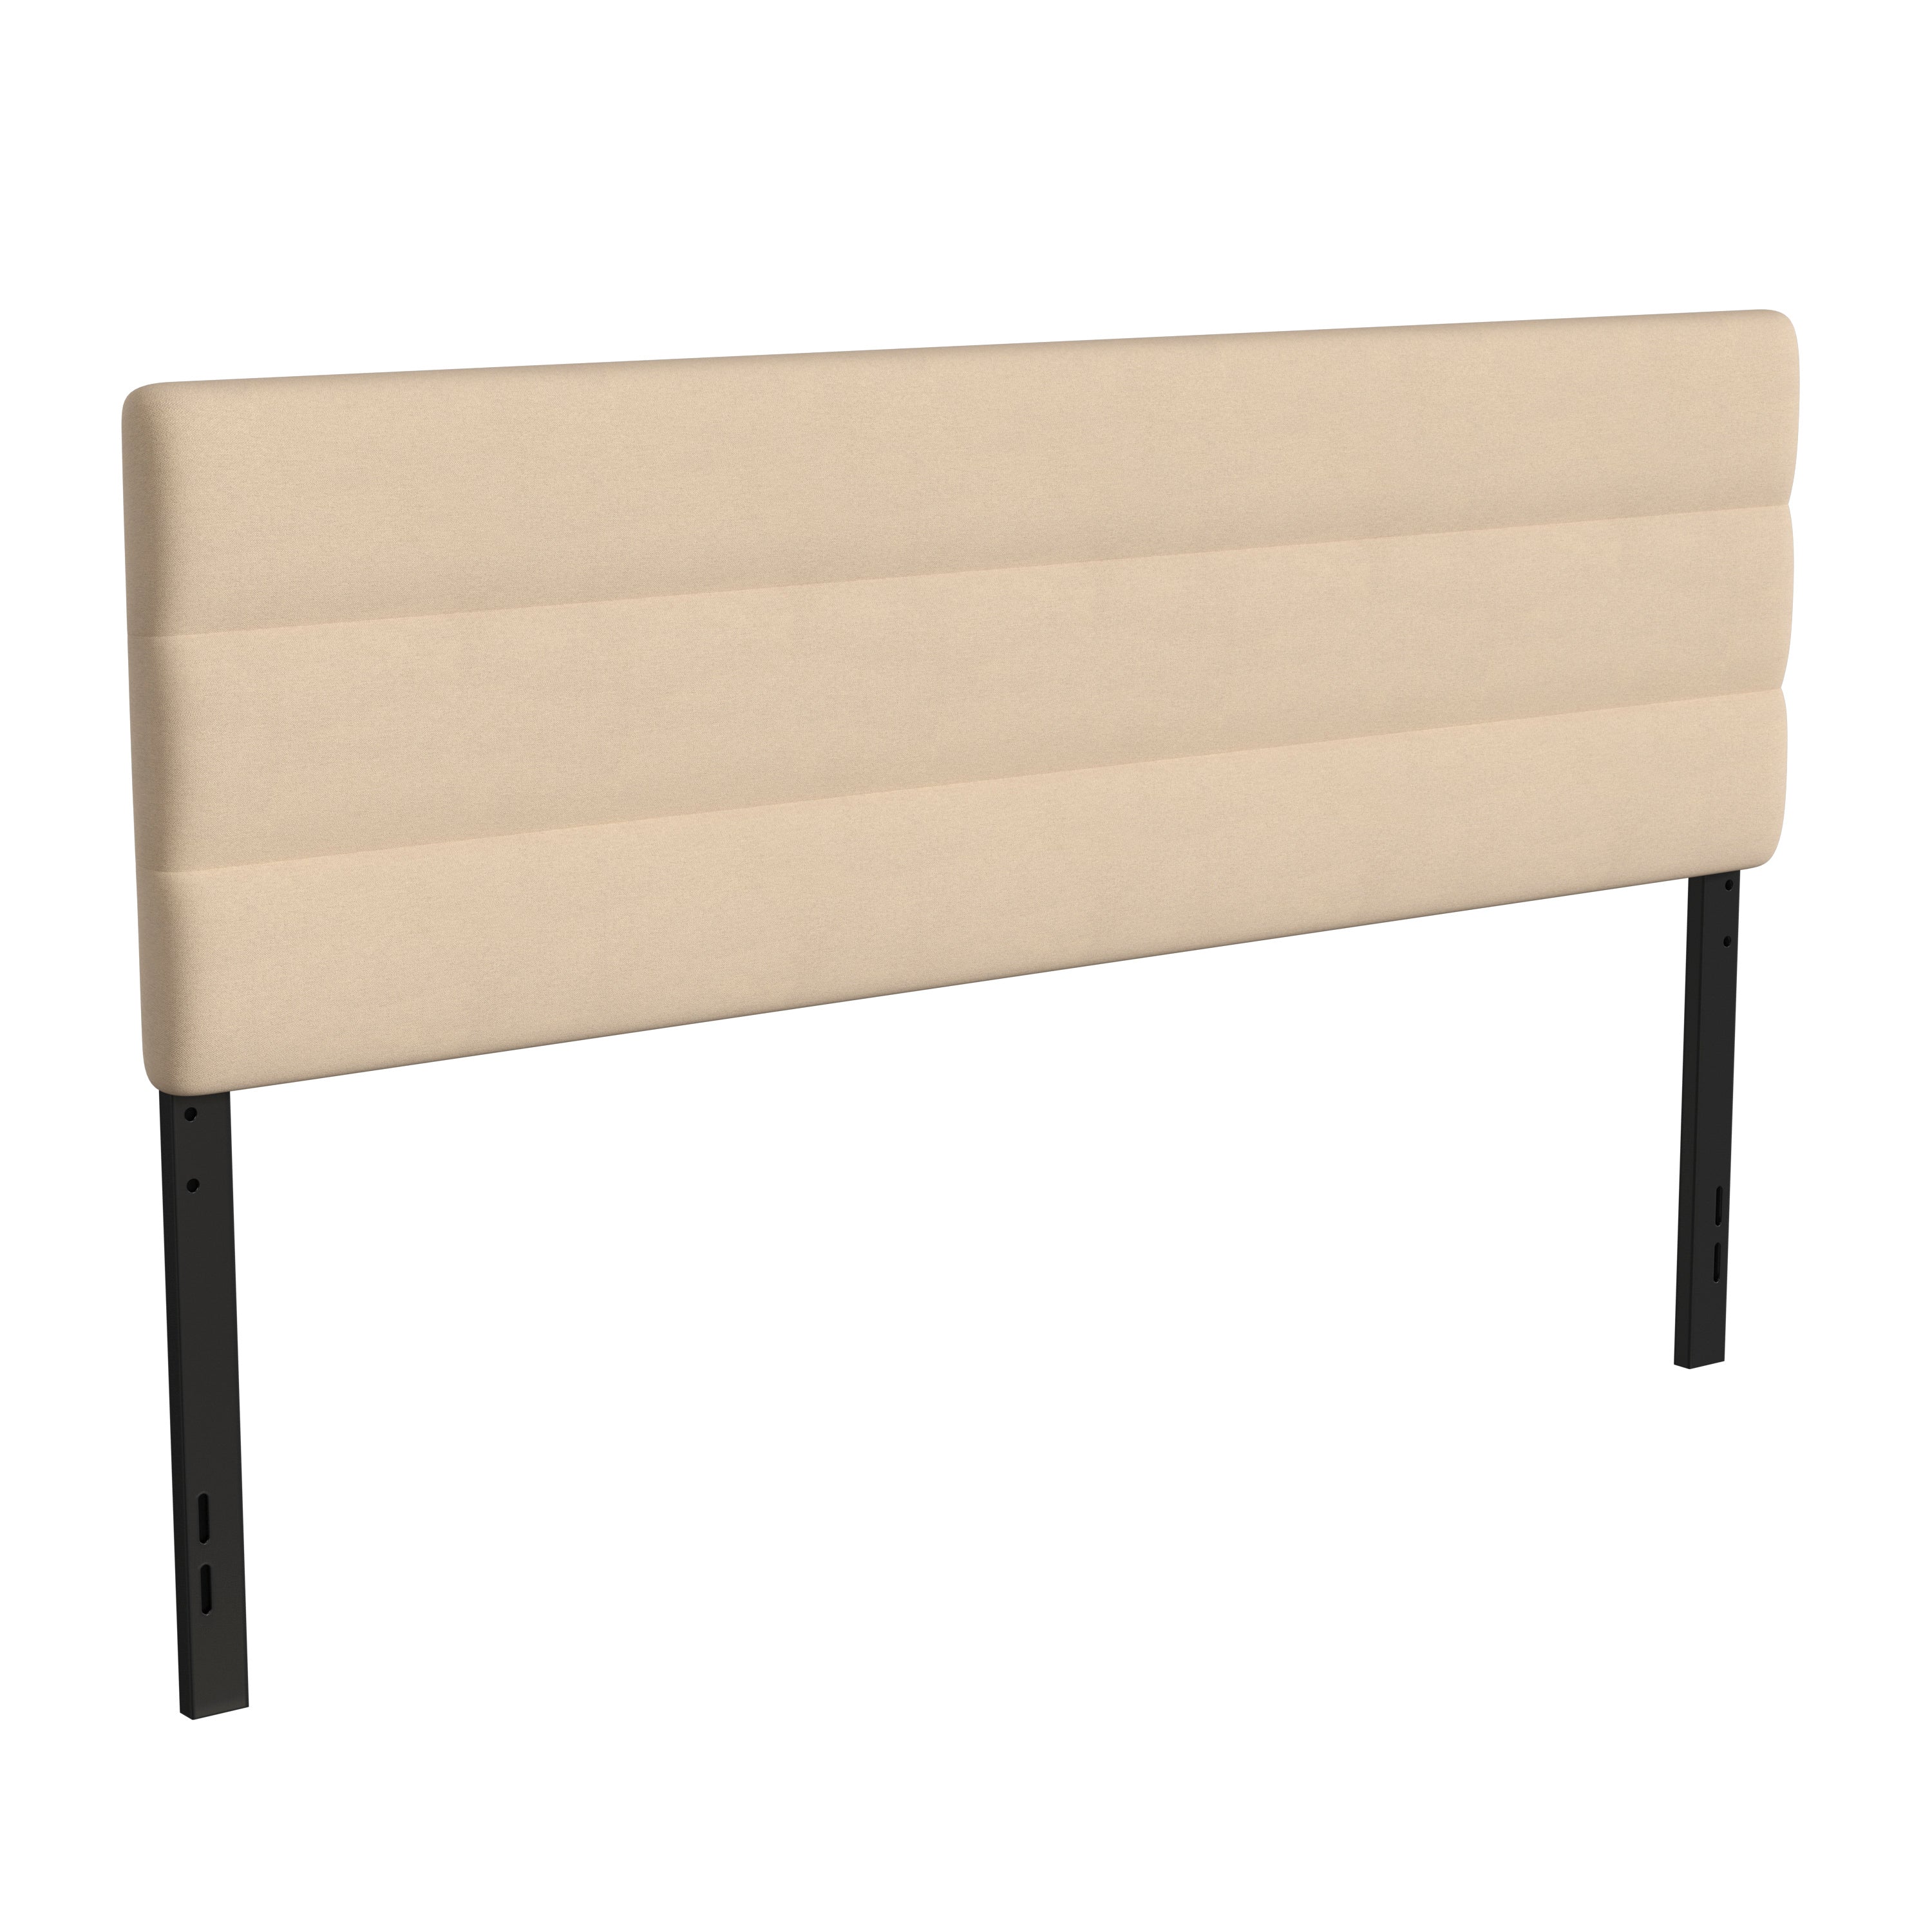 Paxton Channel Stitched Upholstered Headboard, Adjustable Height from 44.5" to 57.25"-Headboard-Flash Furniture-Wall2Wall Furnishings